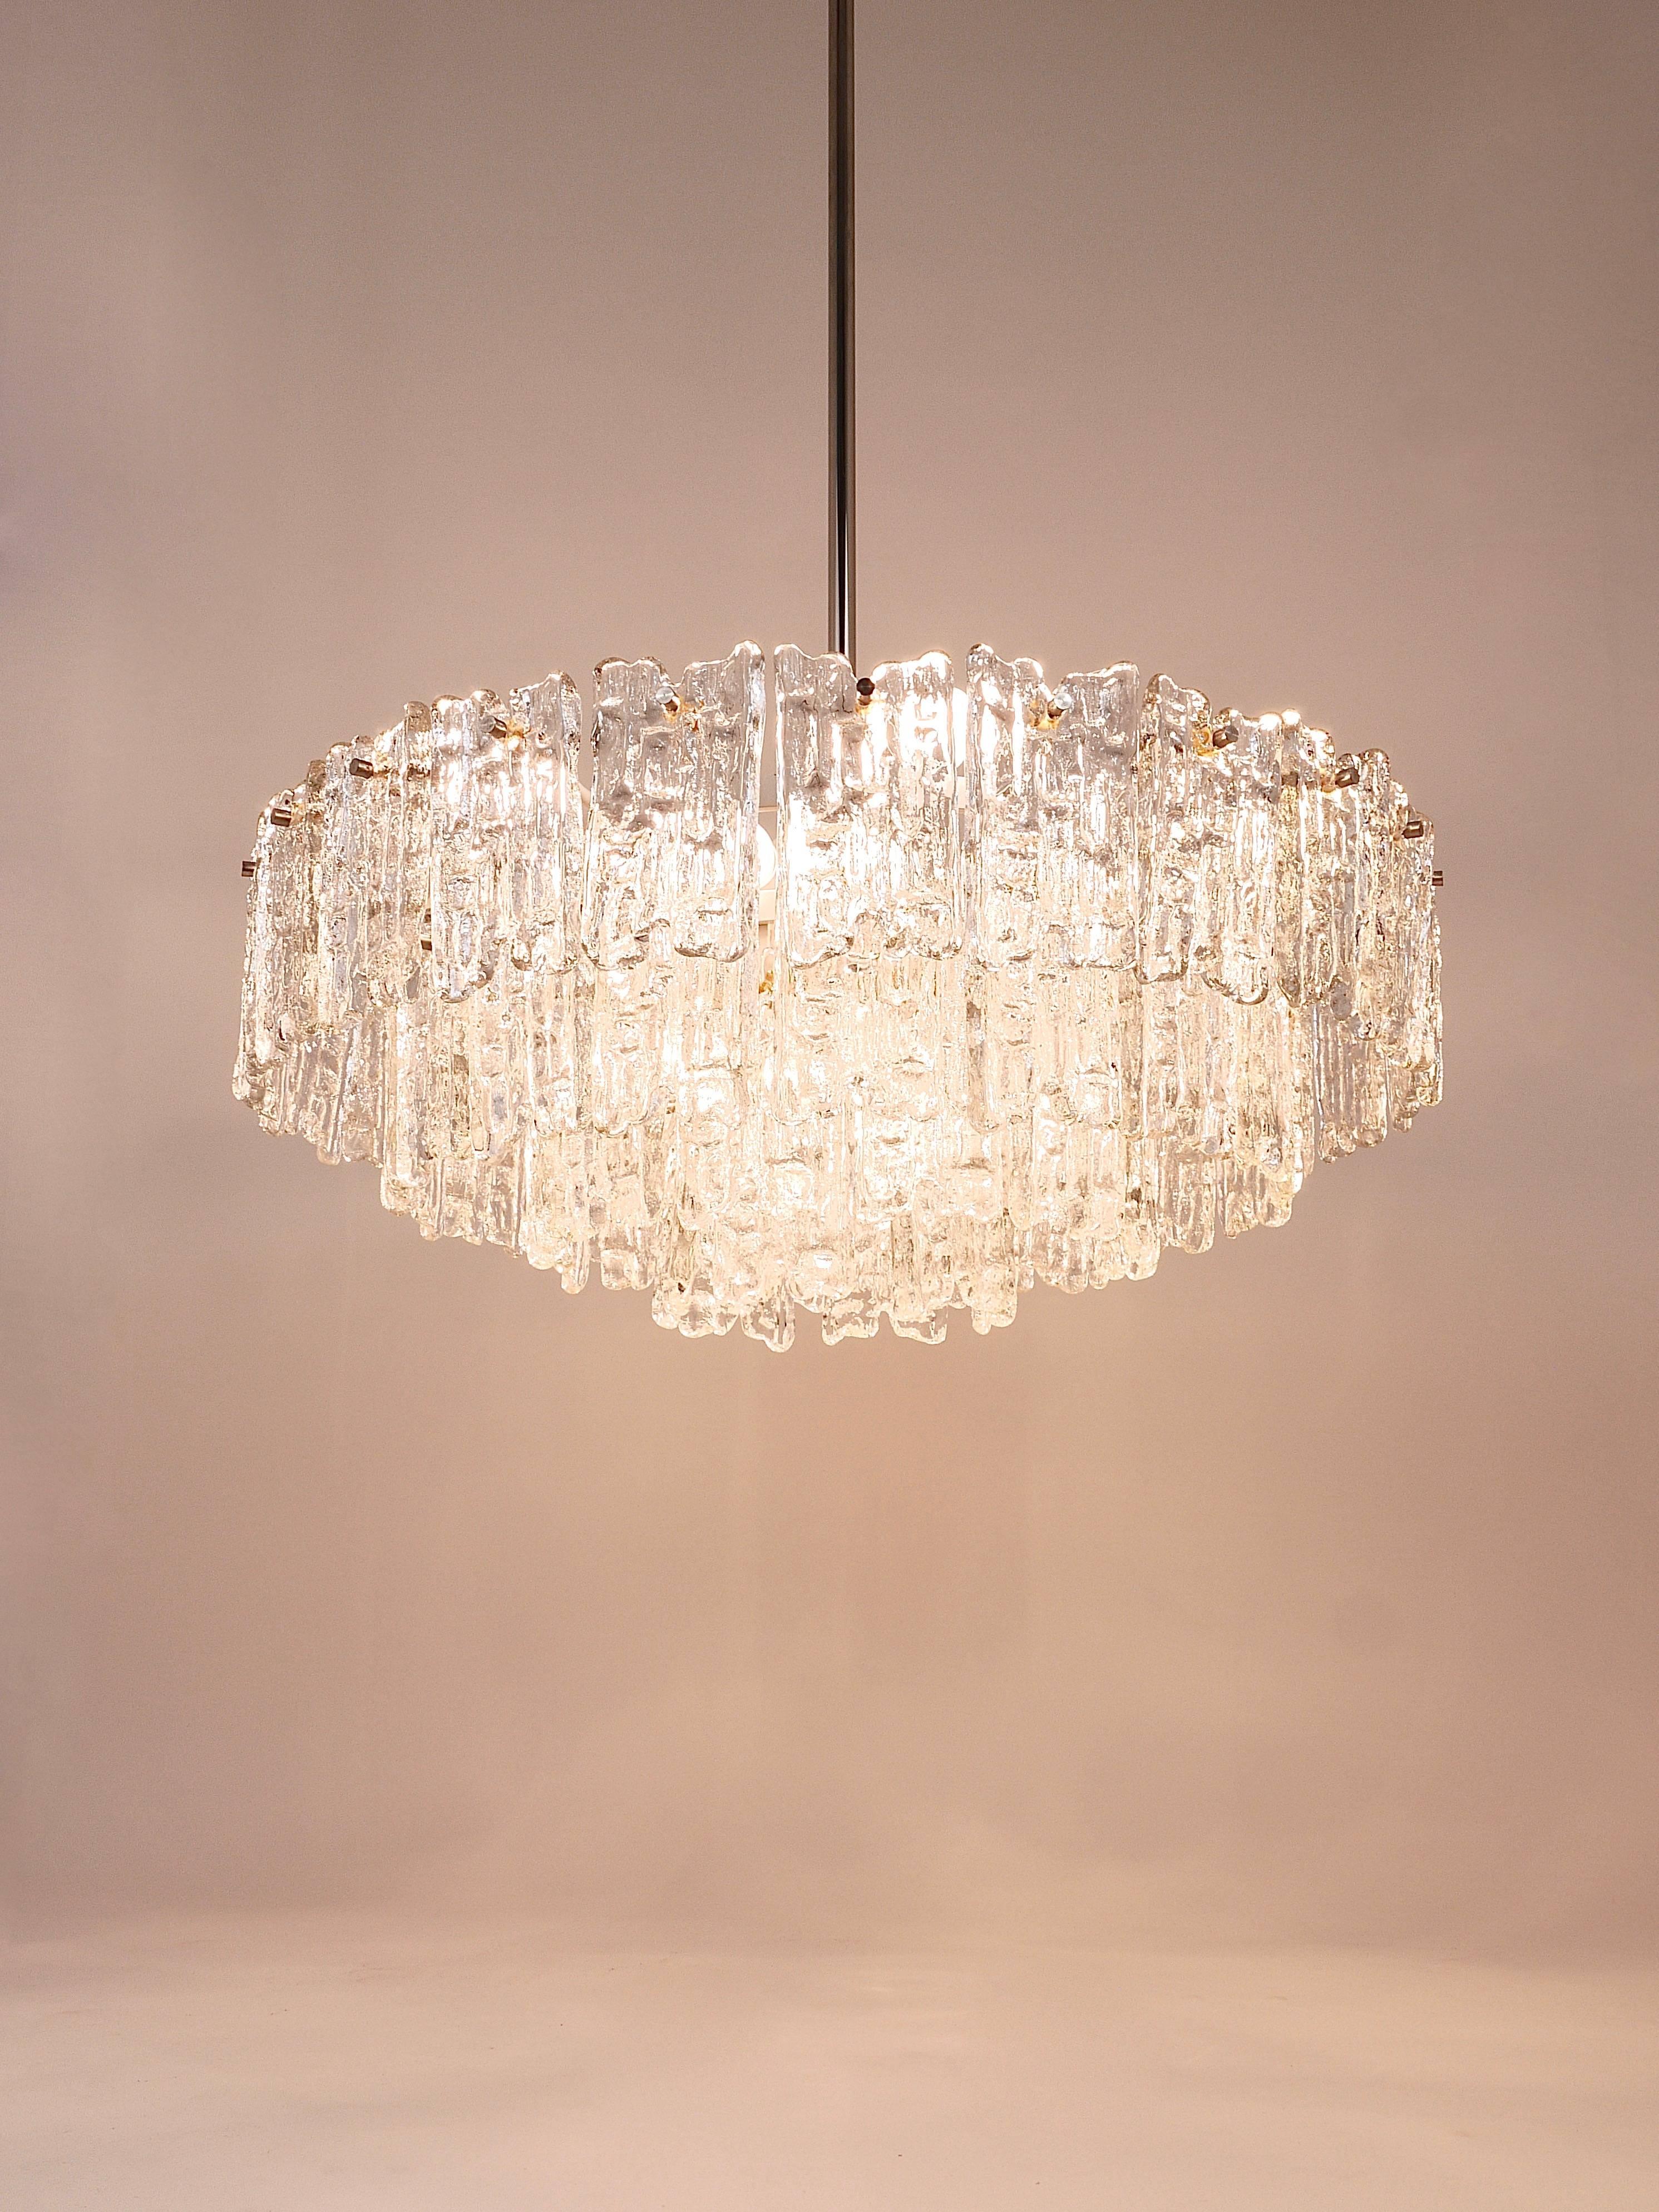 A beautiful and huge four-tiered modernist chandelier, executed by J.T. Kalmar Vienna, Austria in the 1950s. This elegant chandelier has a diameter of 25